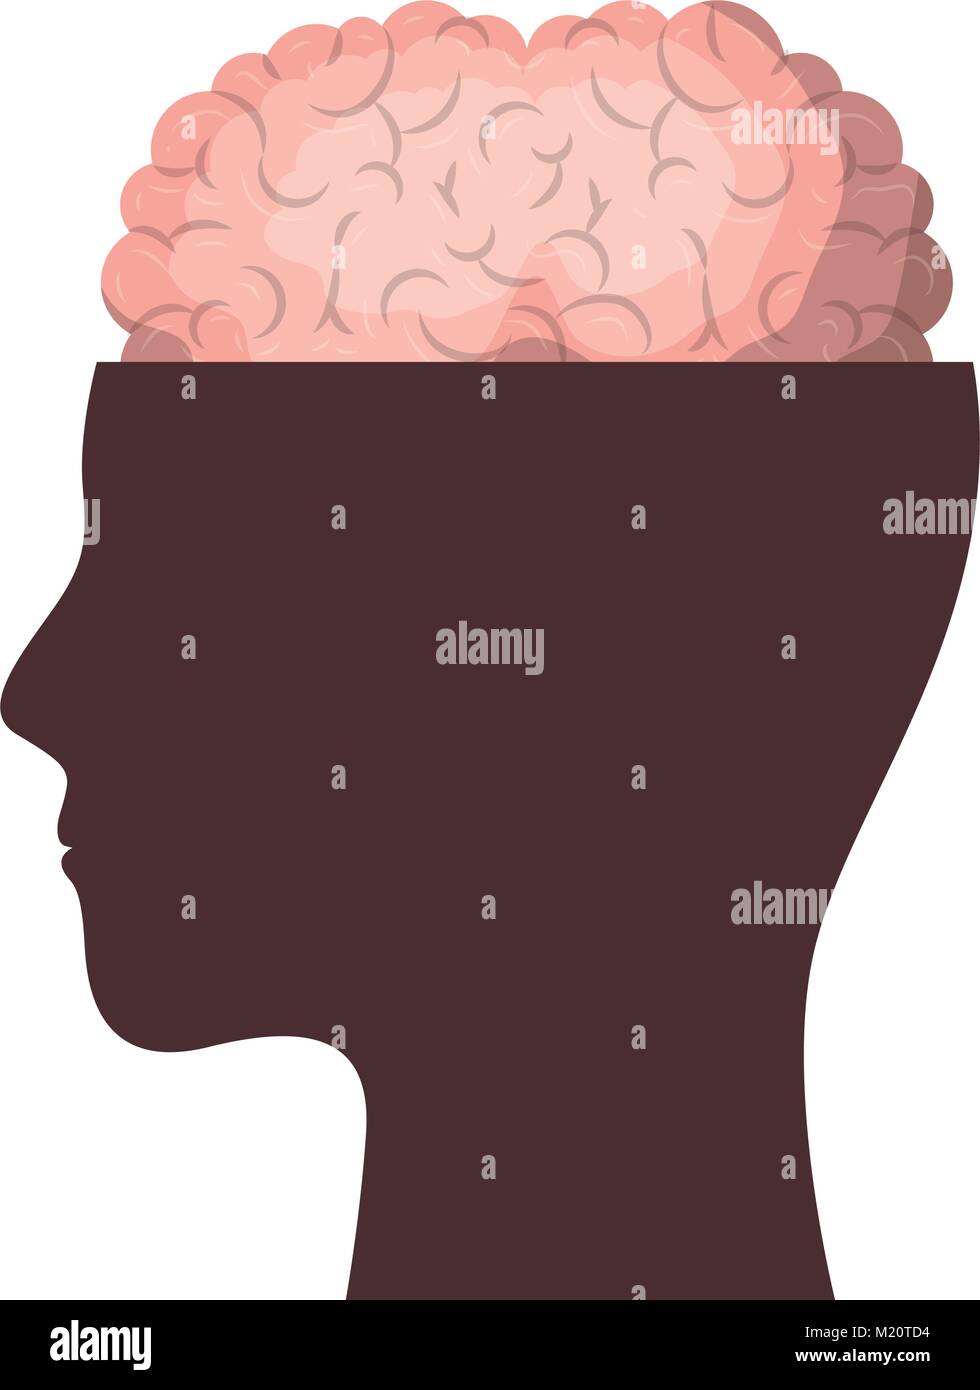 human face brown silhouette with brain exposed in colorful silhouette Stock Vector